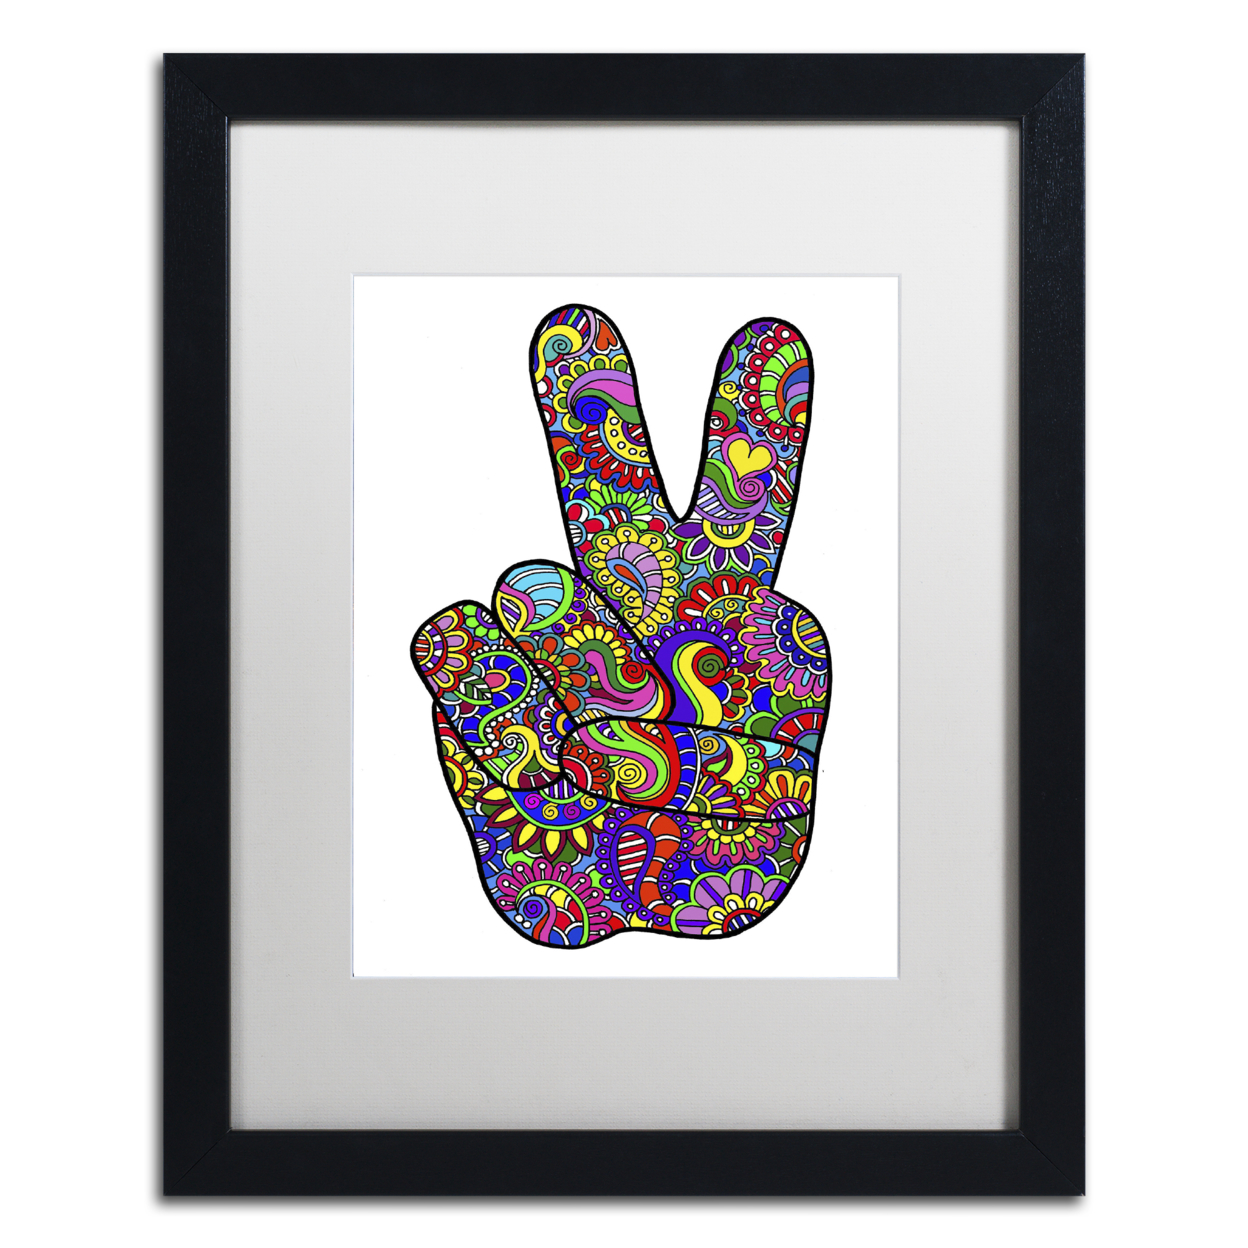 Kathy G. Ahrens 'Psychedelic Mehndi Peace Sign' Black Wooden Framed Art 18 X 22 Inches